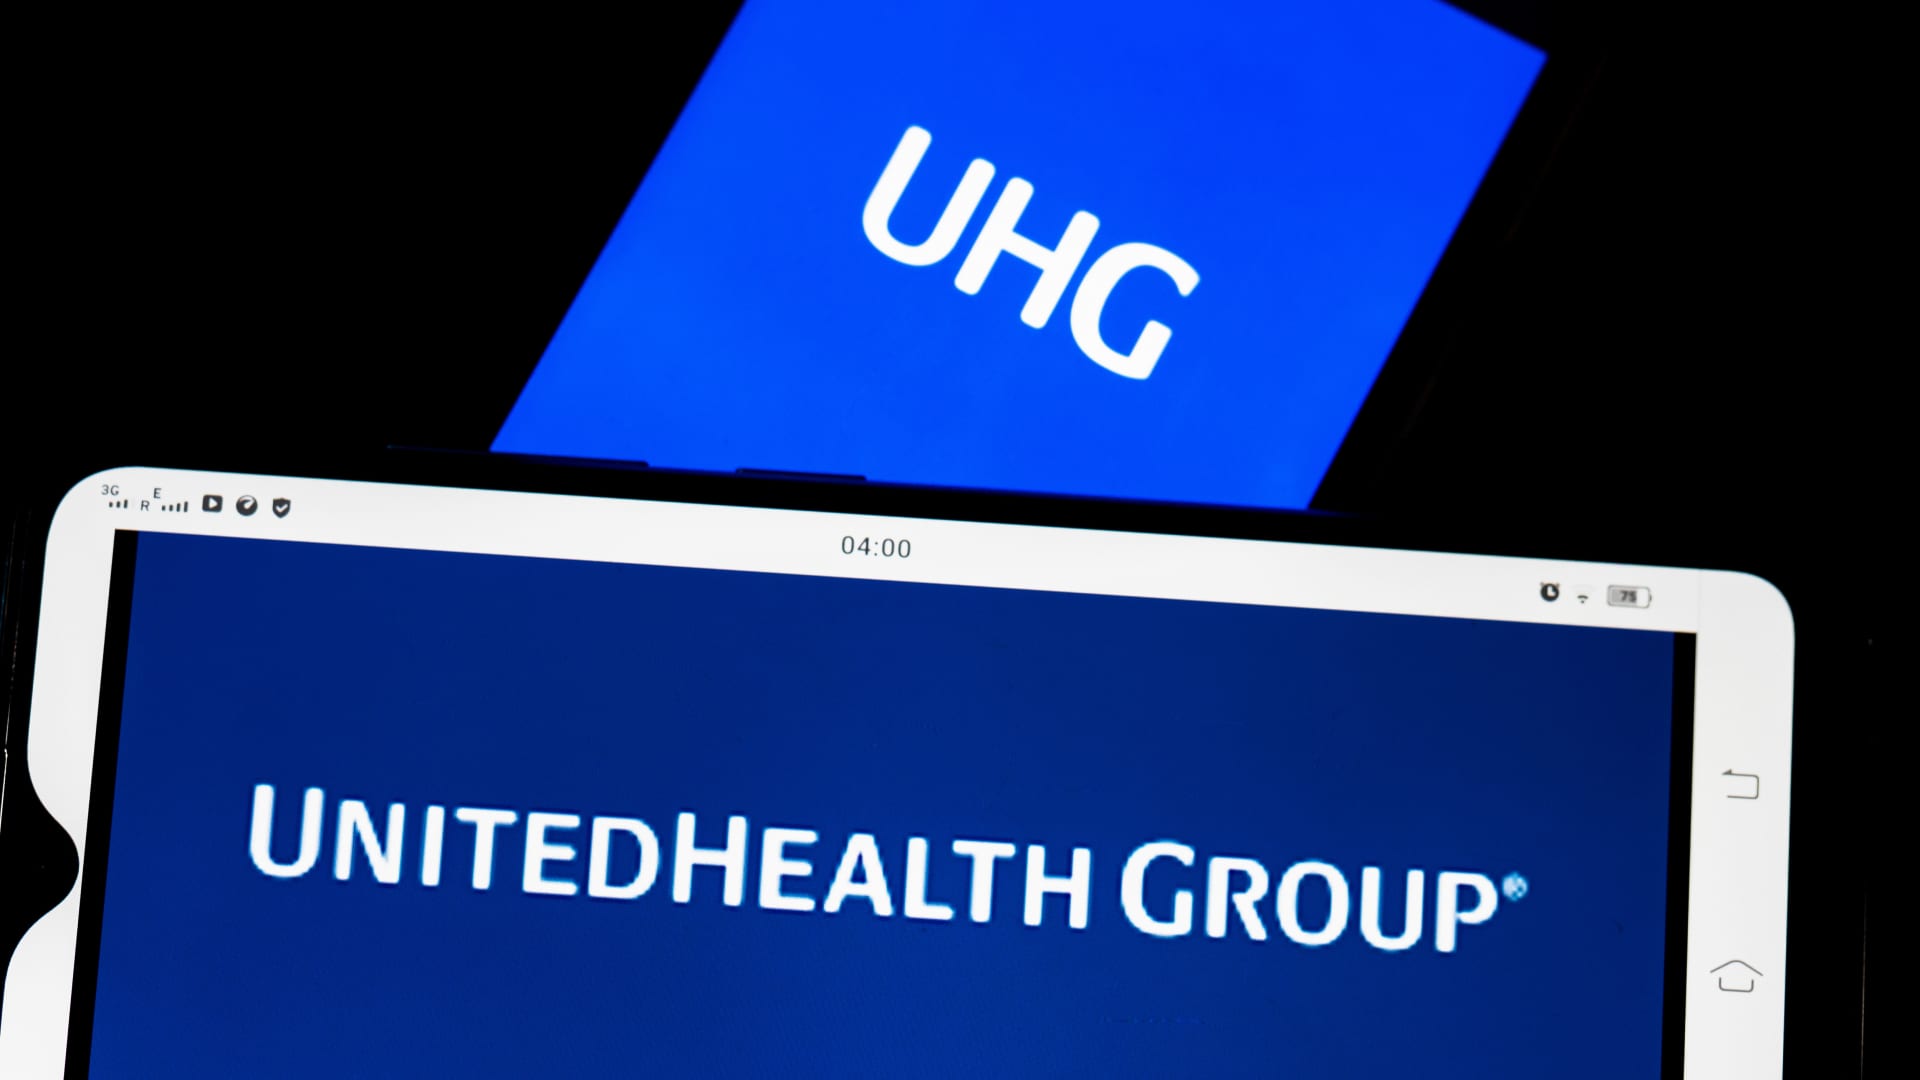 UnitedHealth paid ransom to bad actors, says patient data compromised